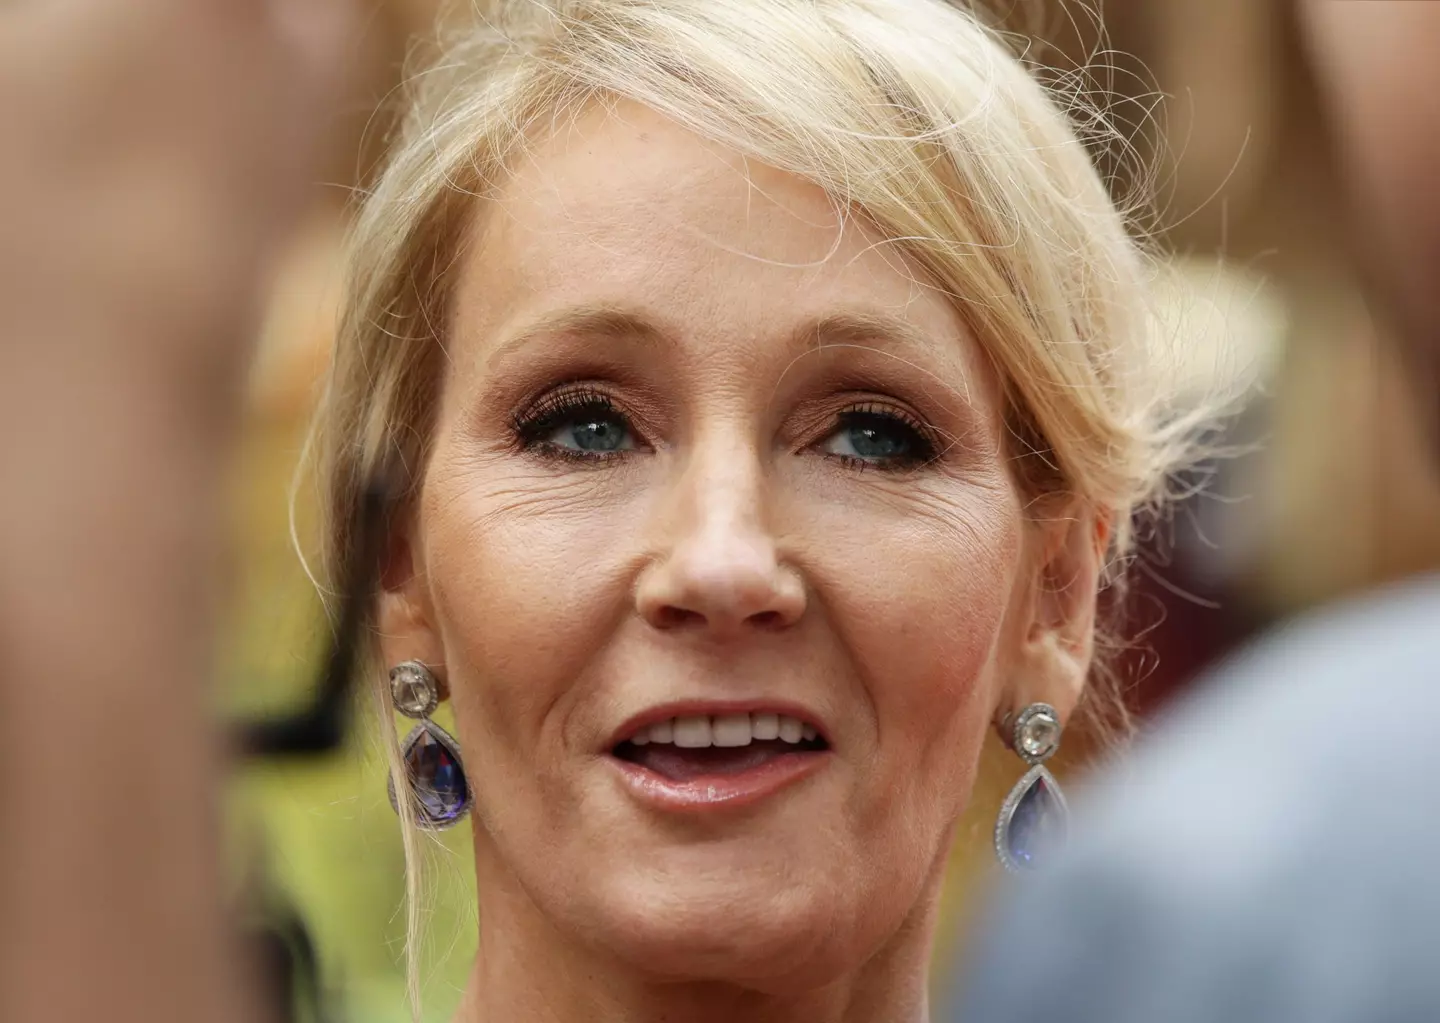 JK Rowling's views on transgender people have sparked controversy.